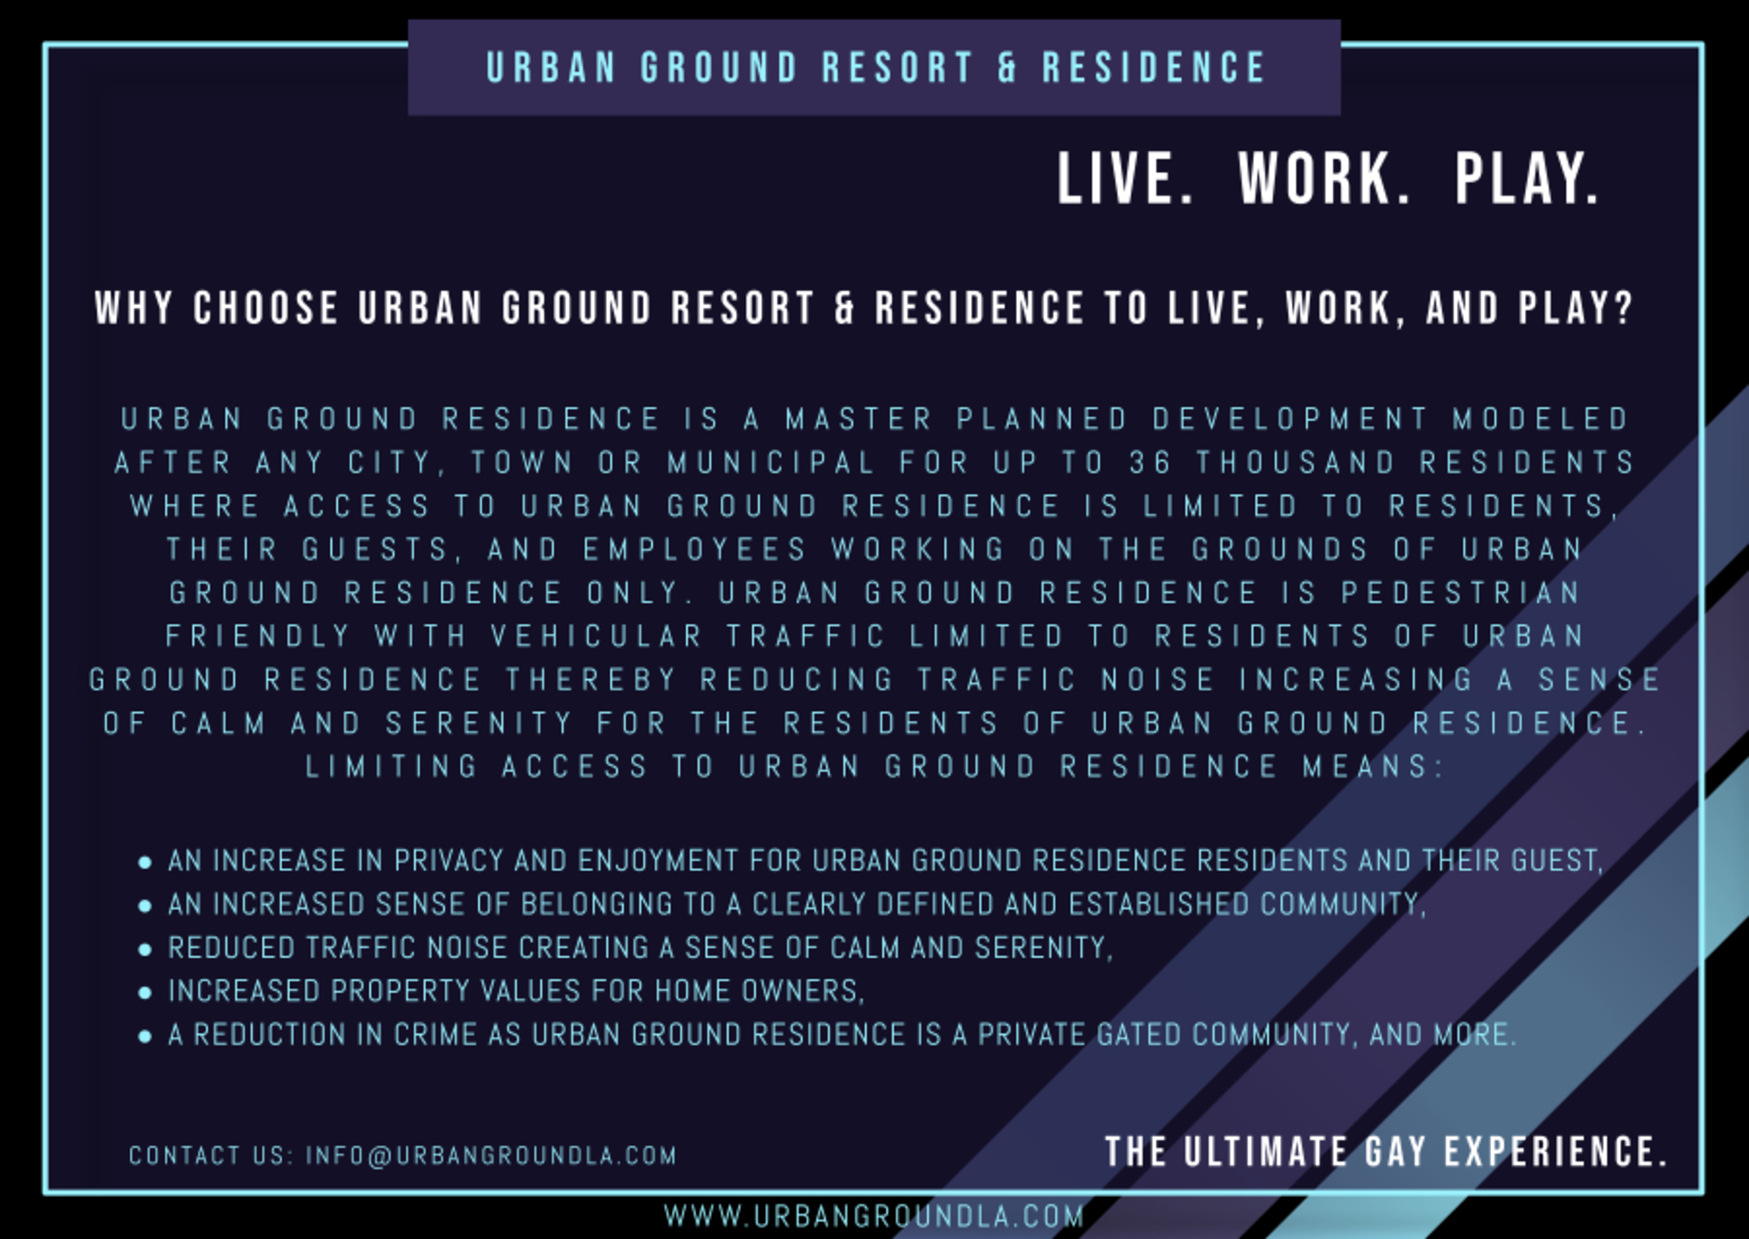 Urban Ground Resort & Residence Limited Access